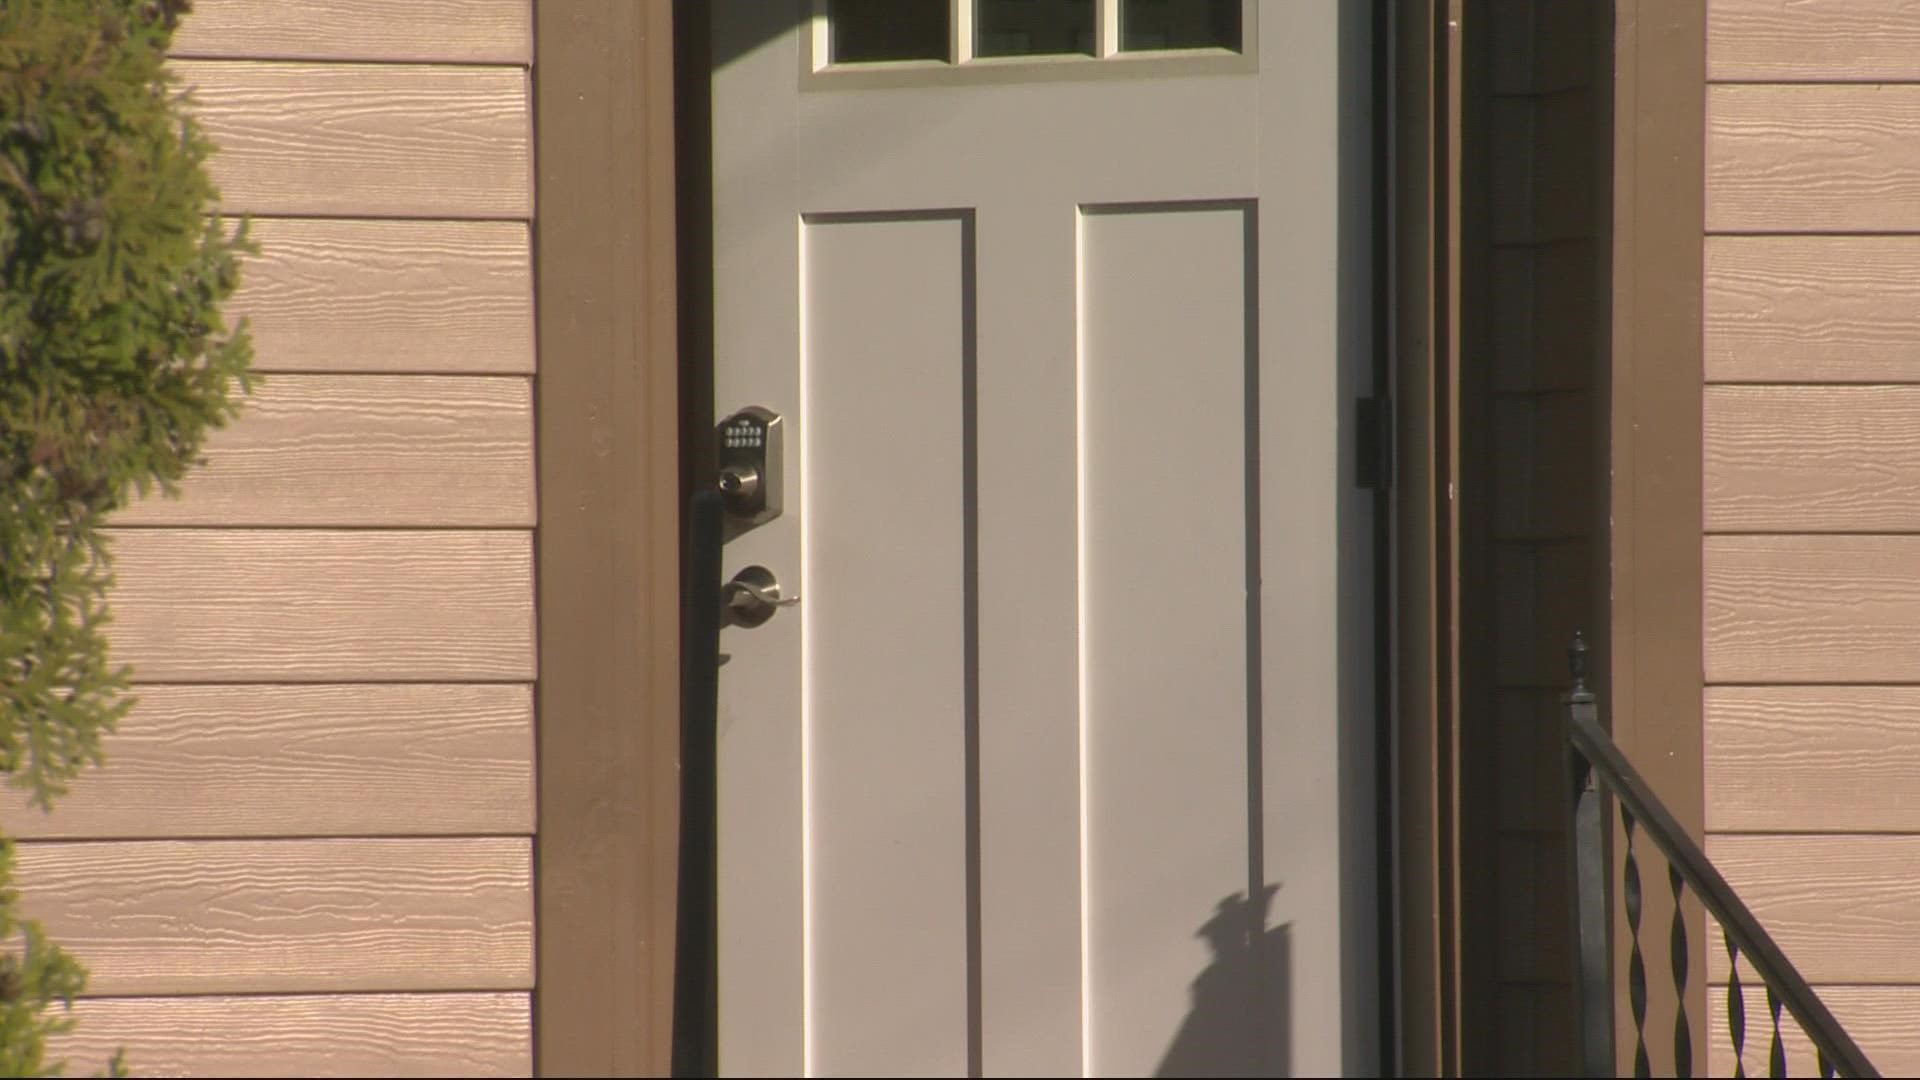 A Gresham man is behind bars after allegedly kidnapping an 89-year-old woman and burglarizing her home in Hood River on May 10. KGW's Katherine Cook reports.